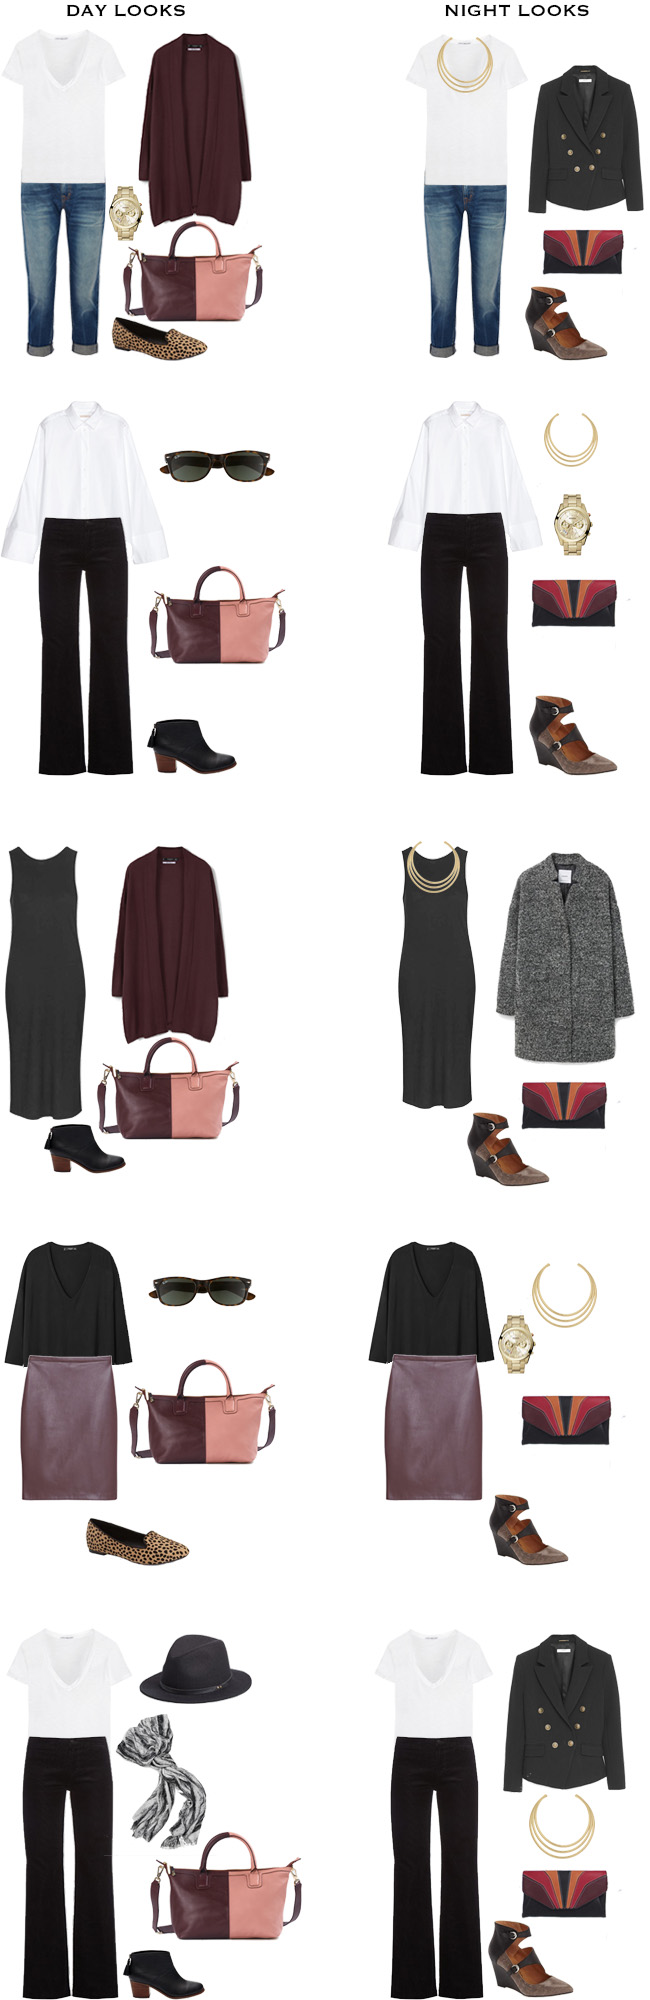 What to Wear for a Business Trip Outfits 1-10 #travel #traveltips #packinglight #travellight